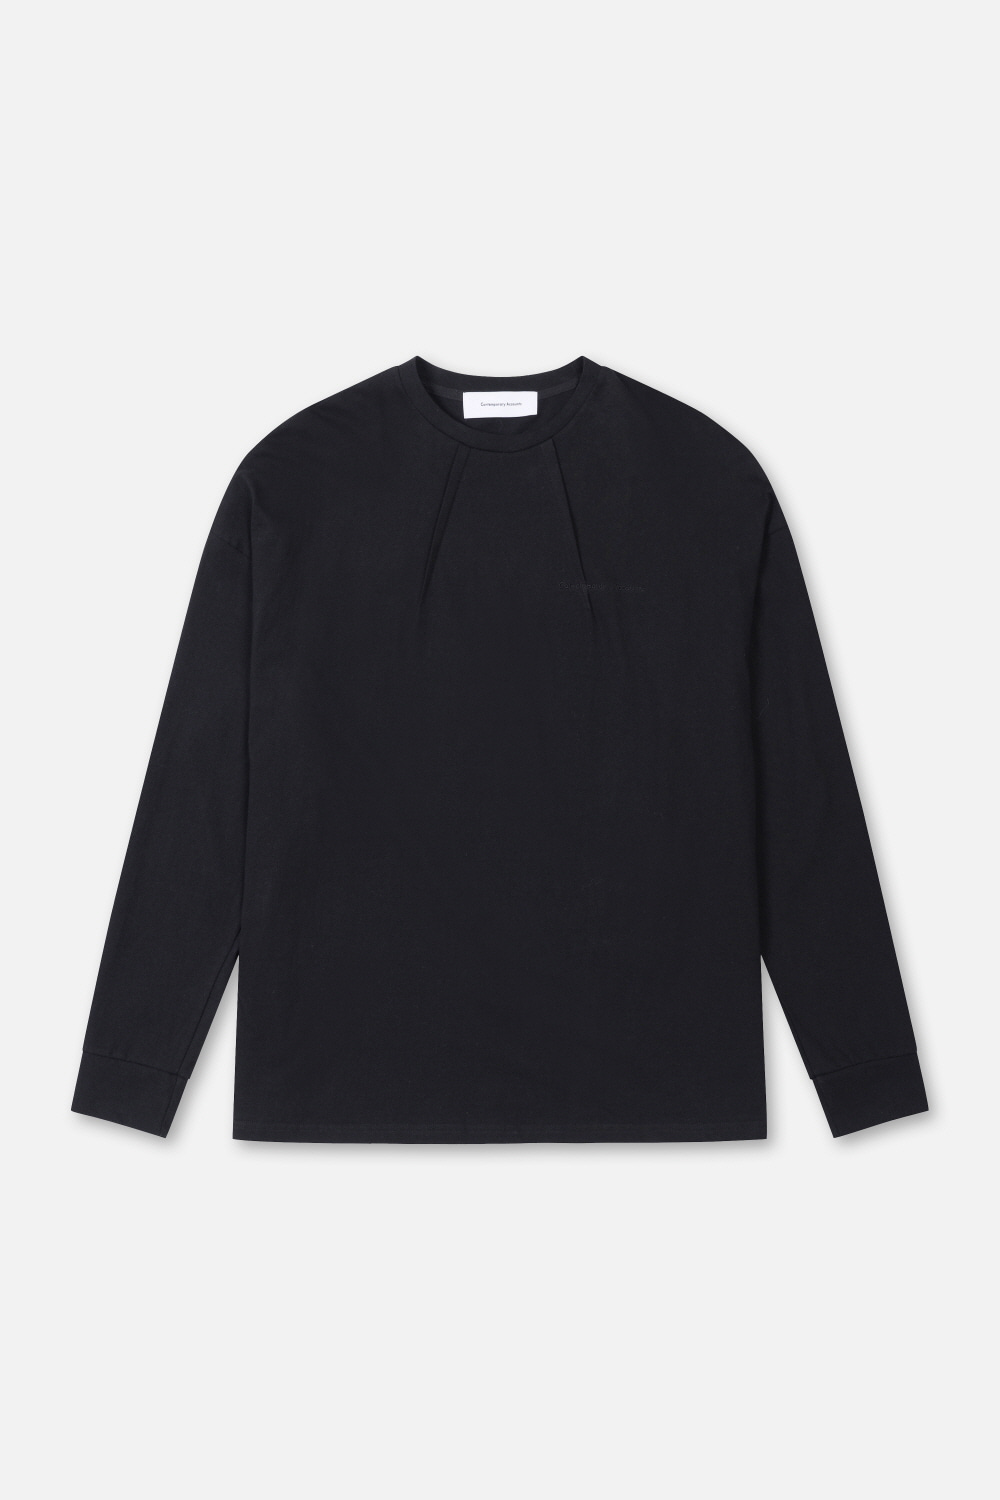 EMBROIDERY DETAIL LONG SLEEVE T-SHIRT (BLACK)